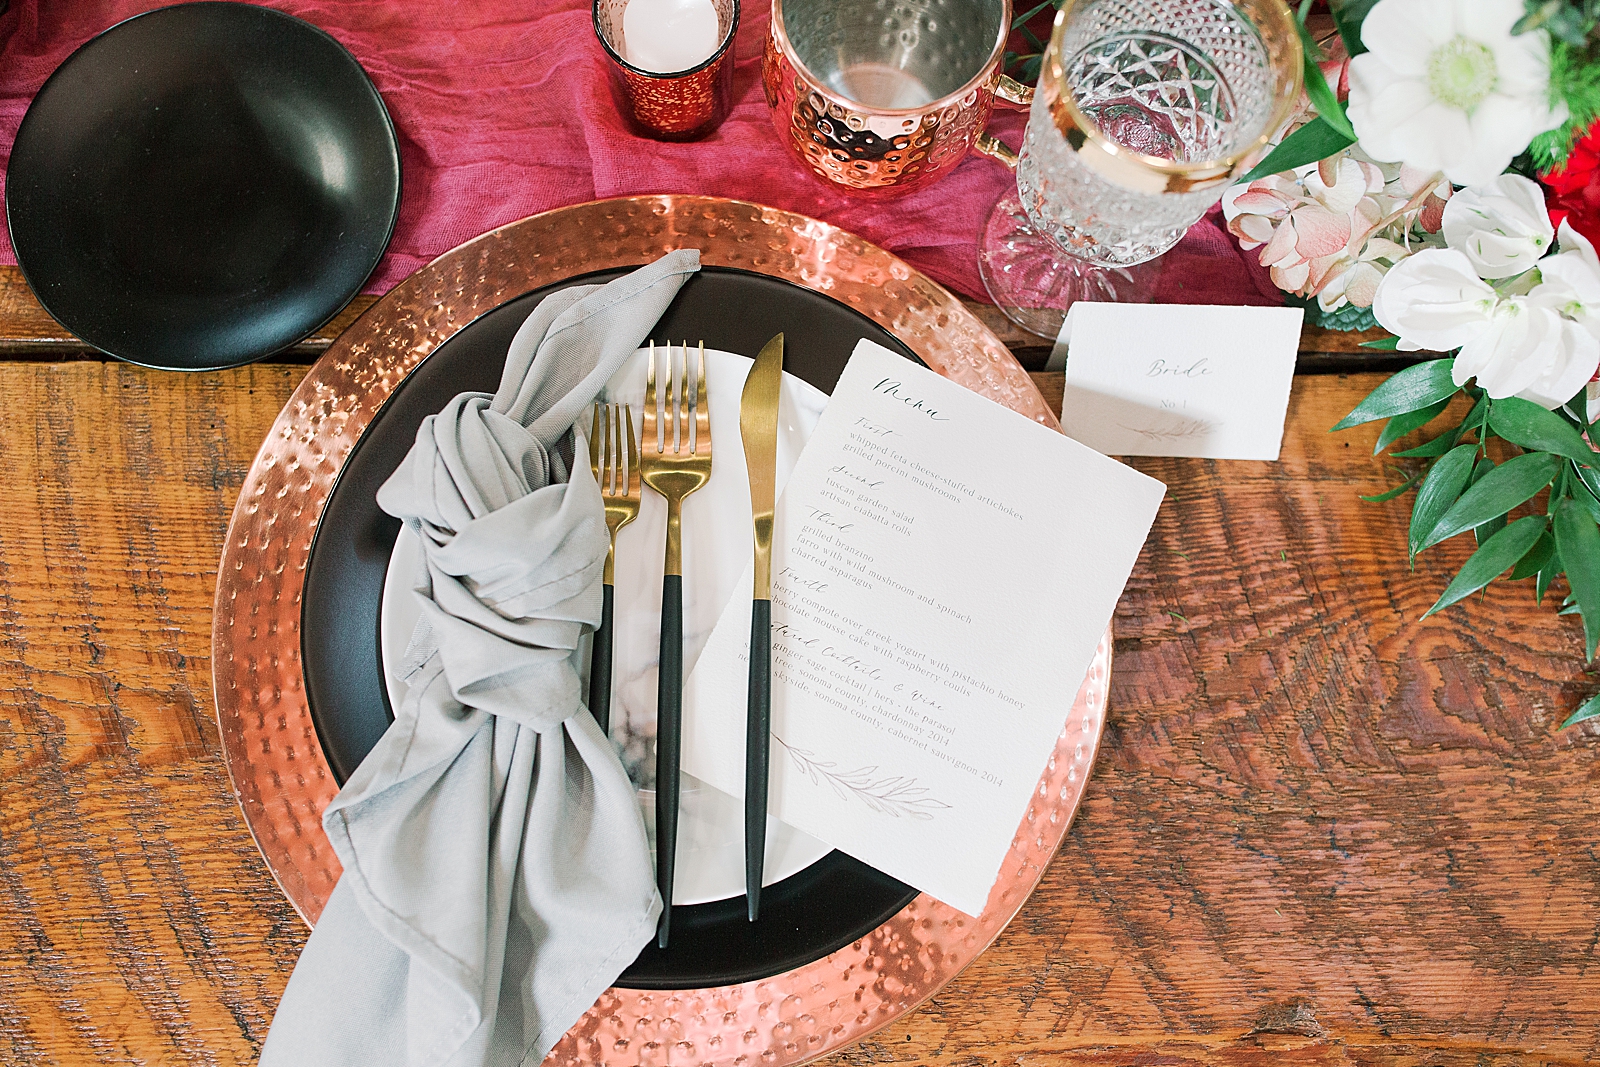 Hackney Warehouse Wedding reception flatware with menu and name tag Photo